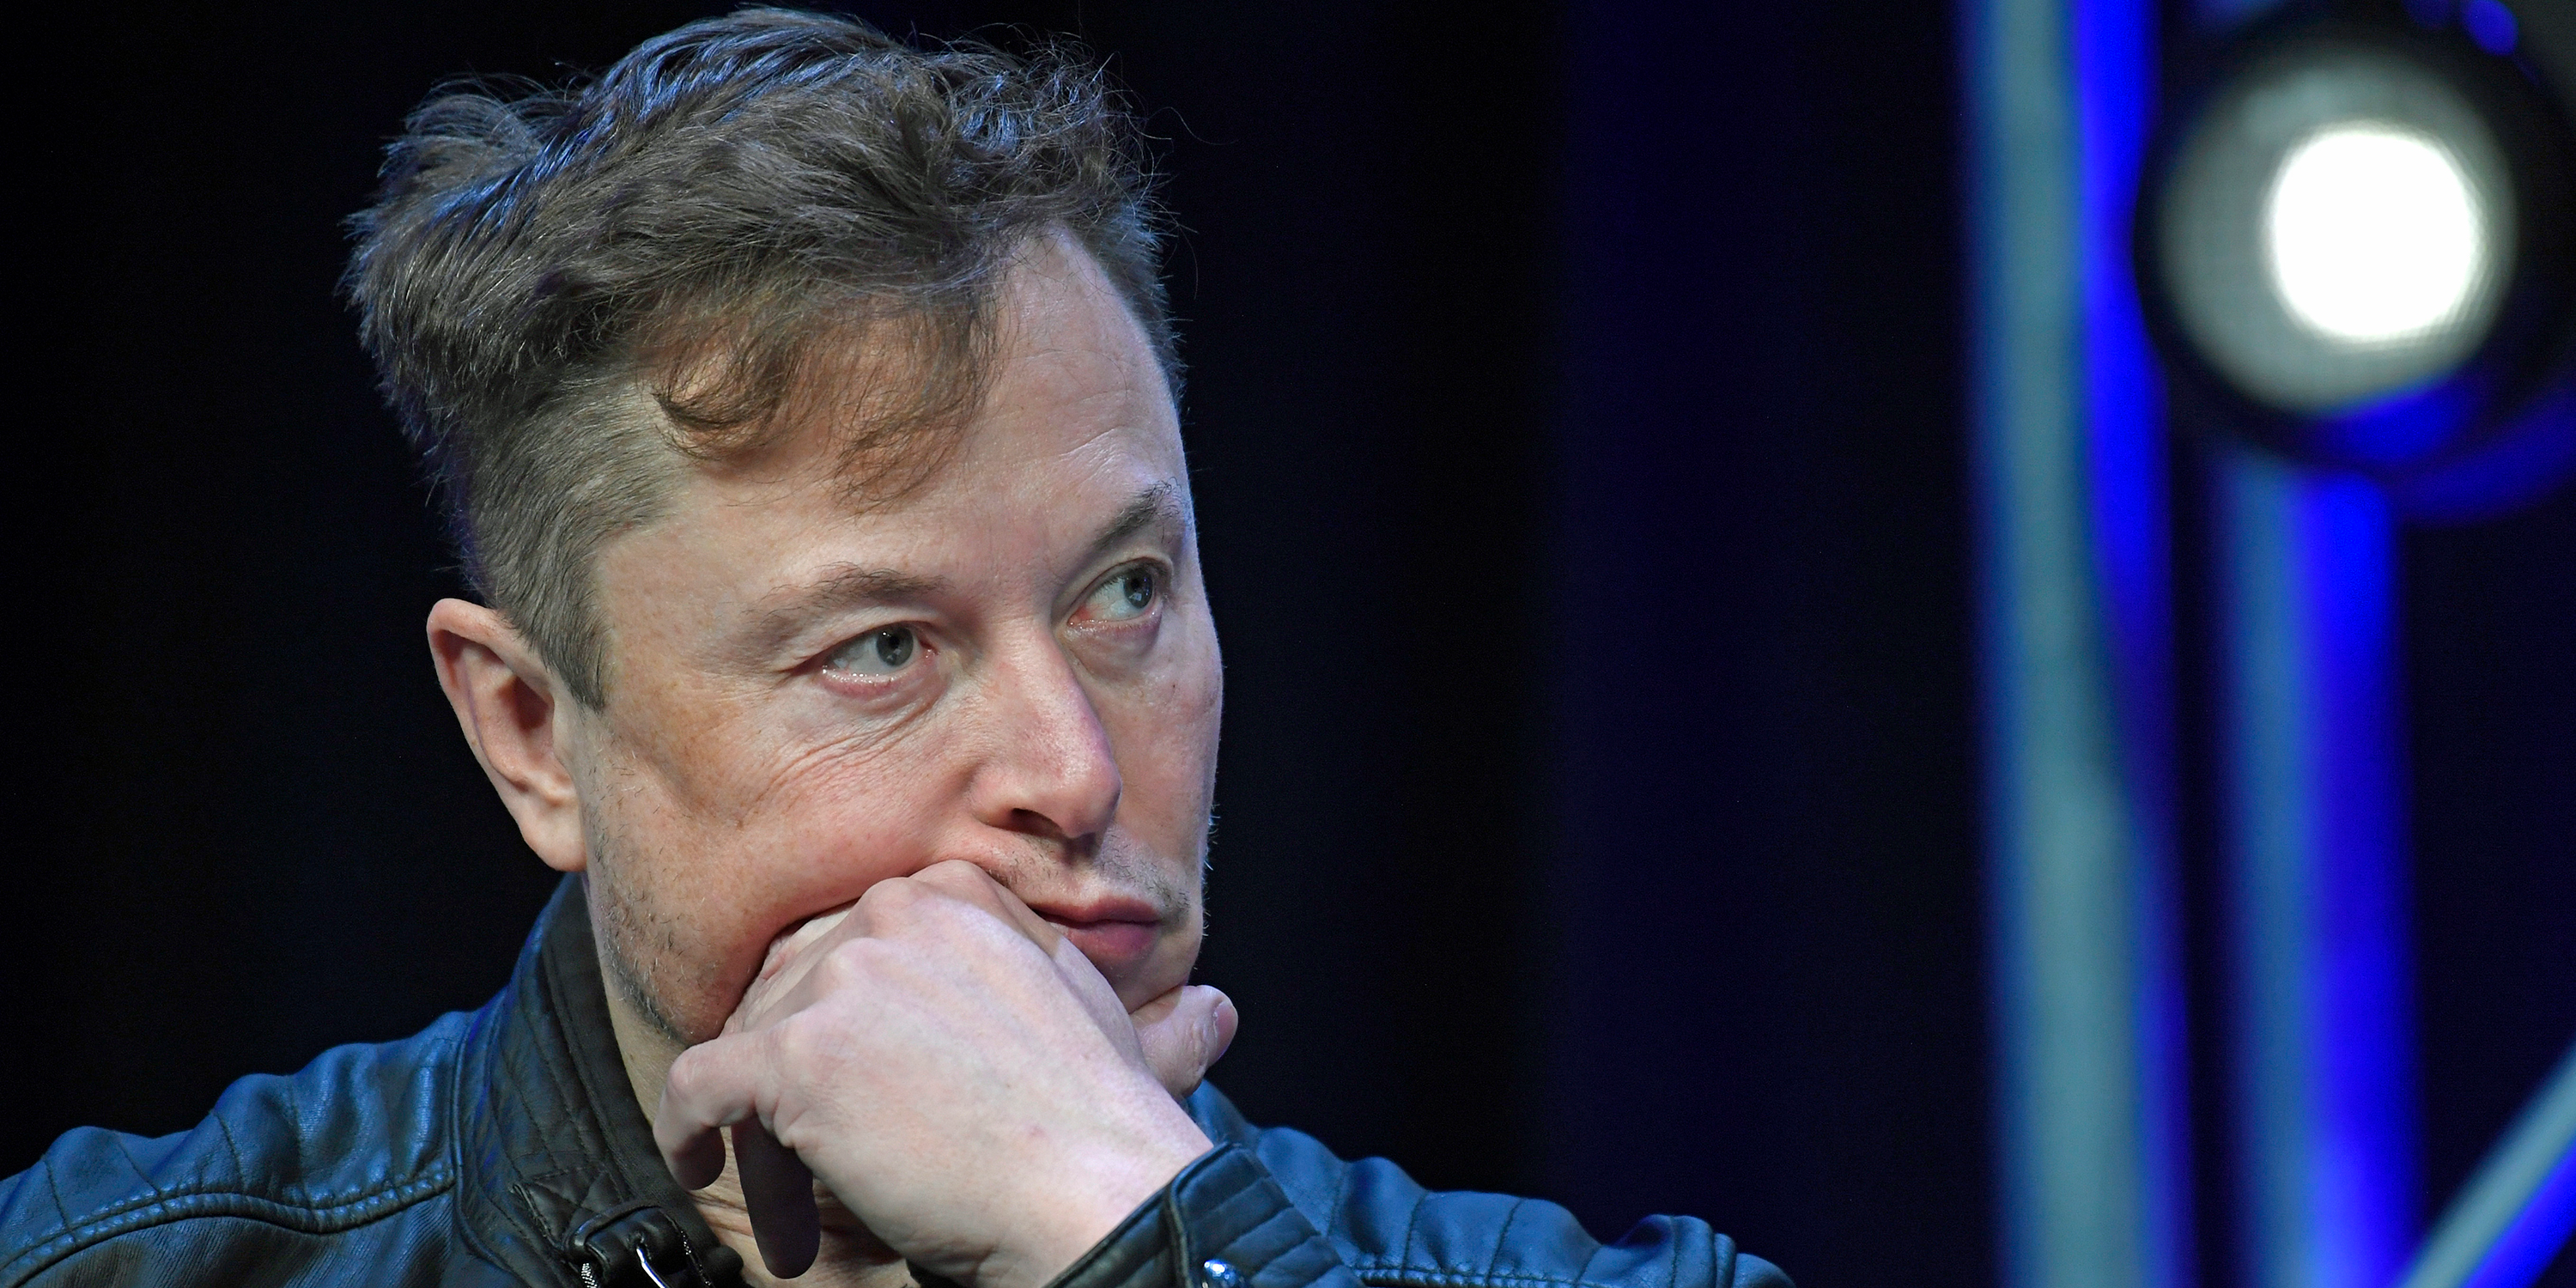 ‘GIVE PEOPLE BACK THEIR GODDAMN FREEDOM’: Elon Musk bashes US shelter-in-place orders as ‘fascist,’ says they’re ‘forcibly imprisoning’ people in their homes (TSLA)